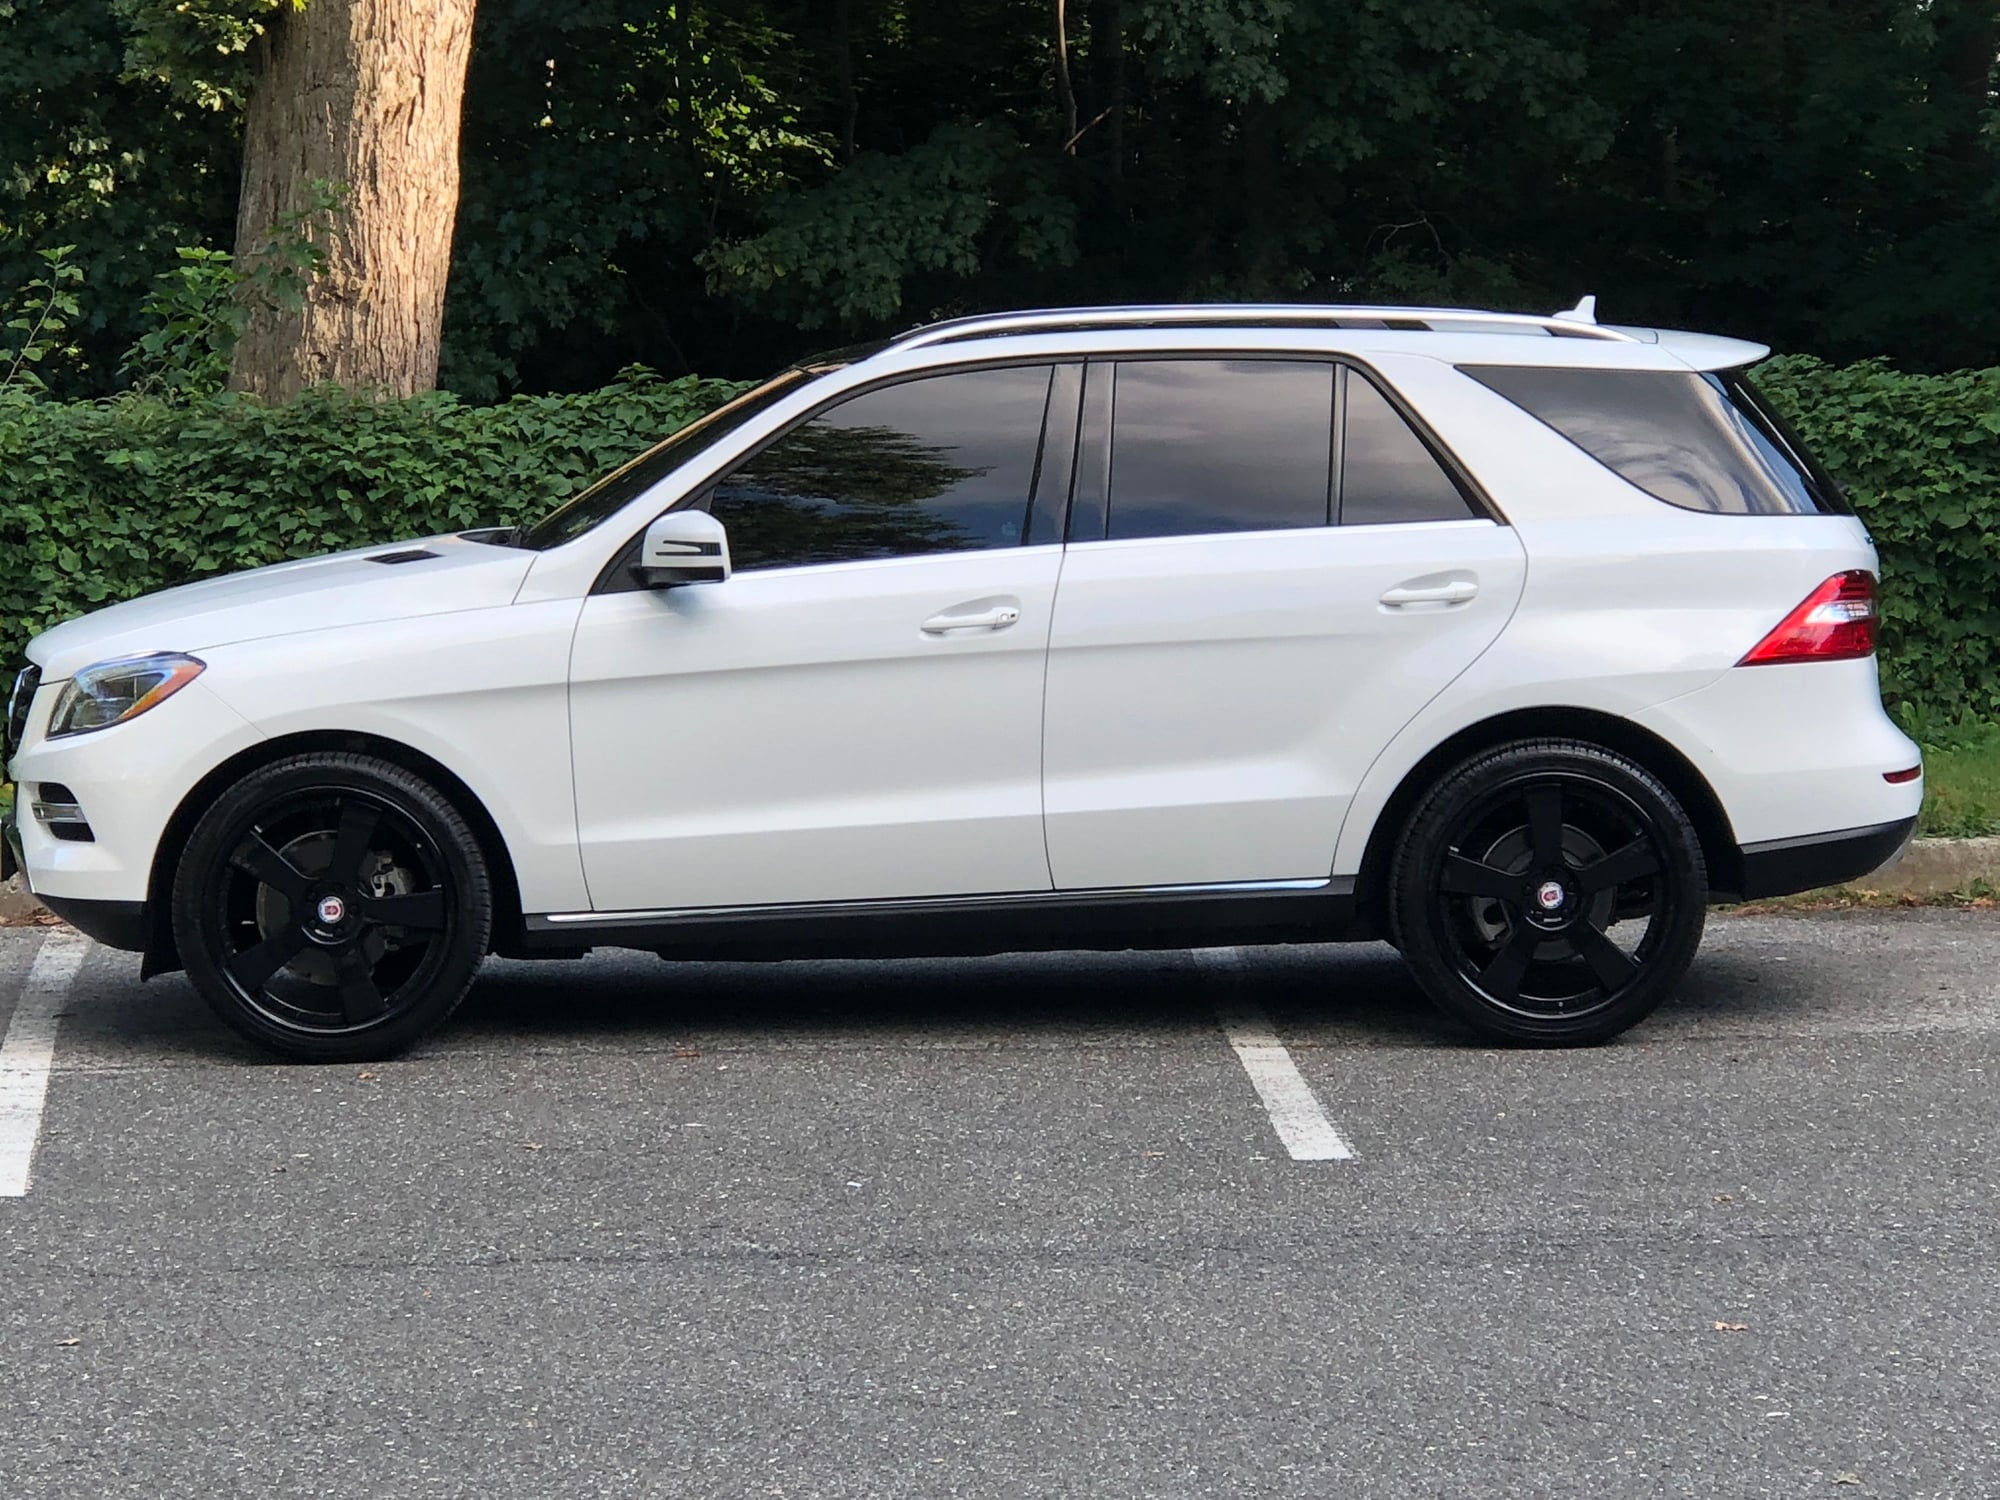 Wheels and Tires/Axles - 22 inch HRE 945 RL 22x9 265/35/22 All Season - Used - 2012 to 2015 Mercedes-Benz ML350 - 2015 to 2019 Mercedes-Benz GLE350 - Yonkers, NY 10710, United States